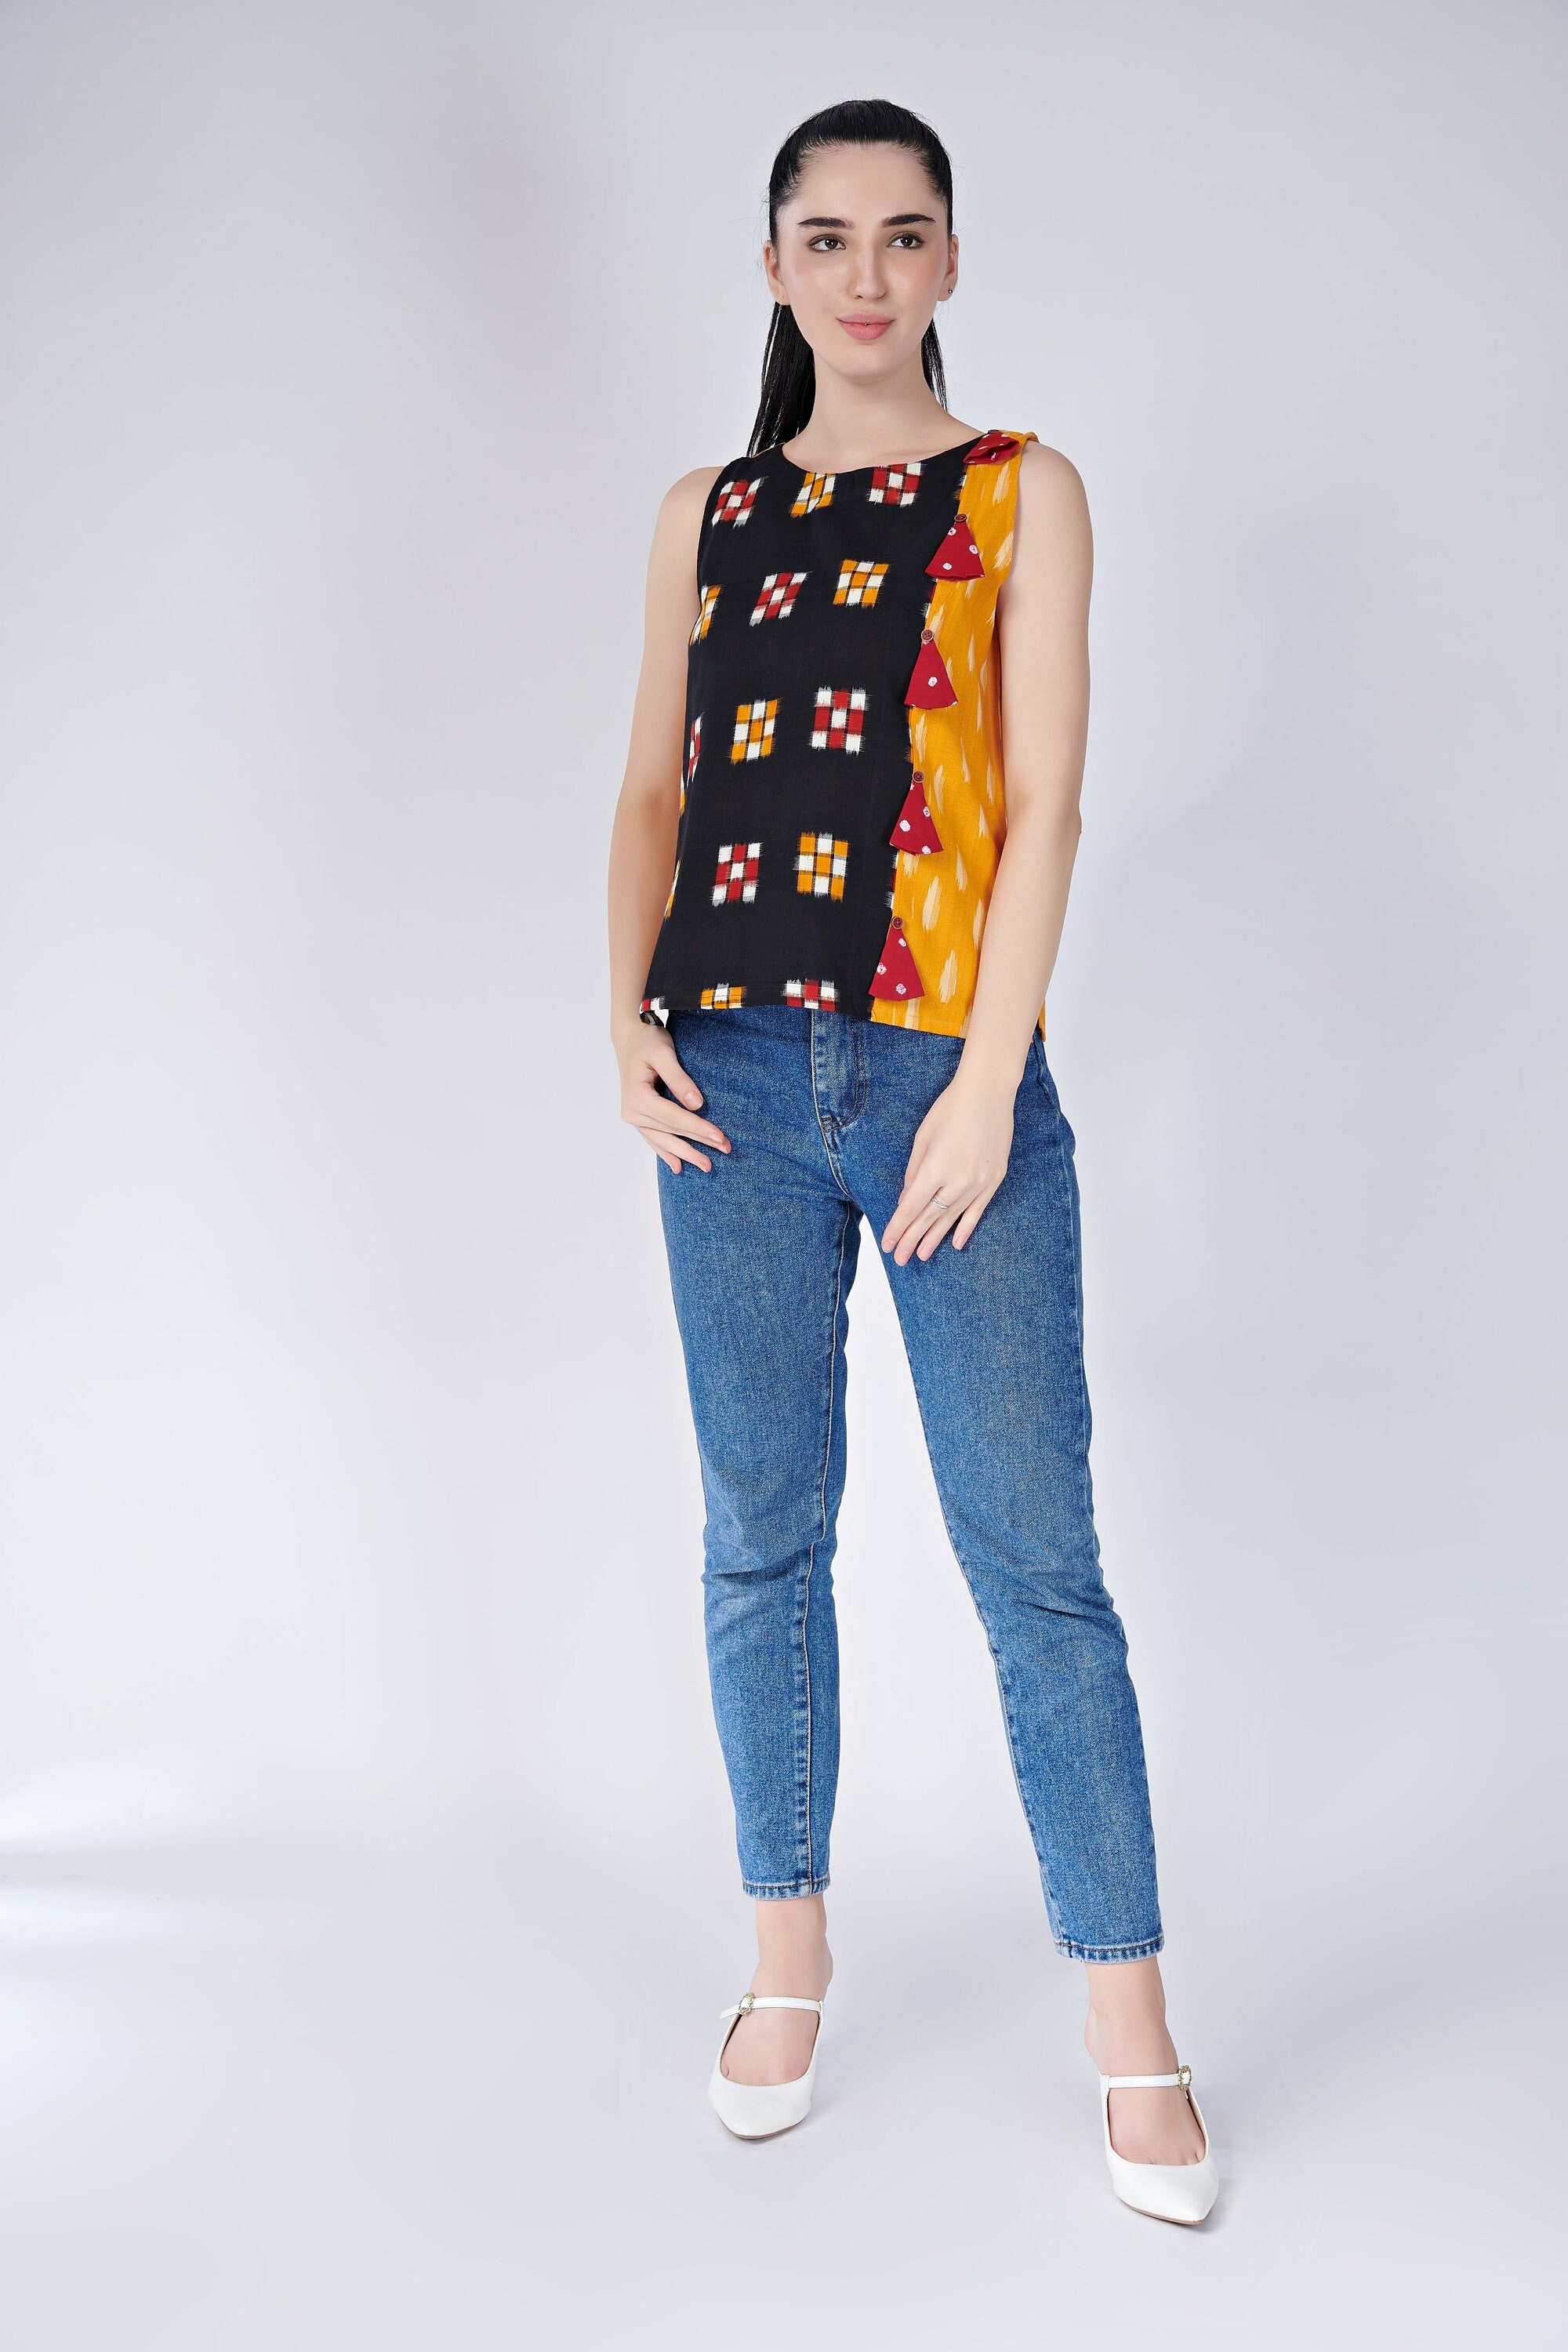 SANU FASHION Casual Printed Women Black Top - Buy SANU FASHION Casual  Printed Women Black Top Online at Best Prices in India | Flipkart.com